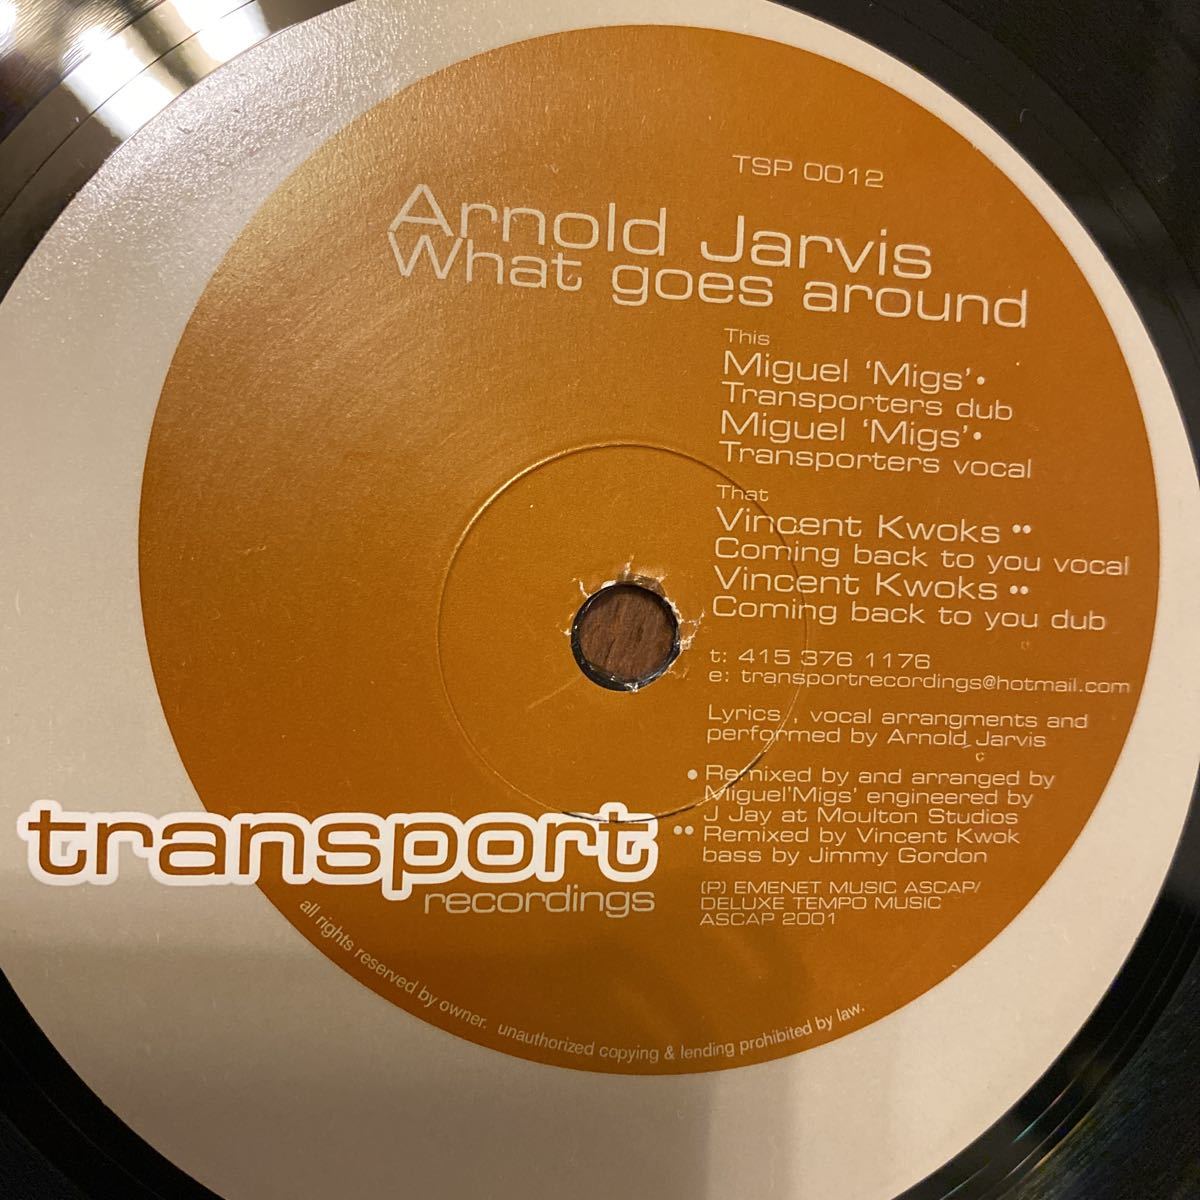 transport recordings presents Arnold Jarvis / What goes around Miguel Migs Vincent Kwok 12インチ レコード house_画像2